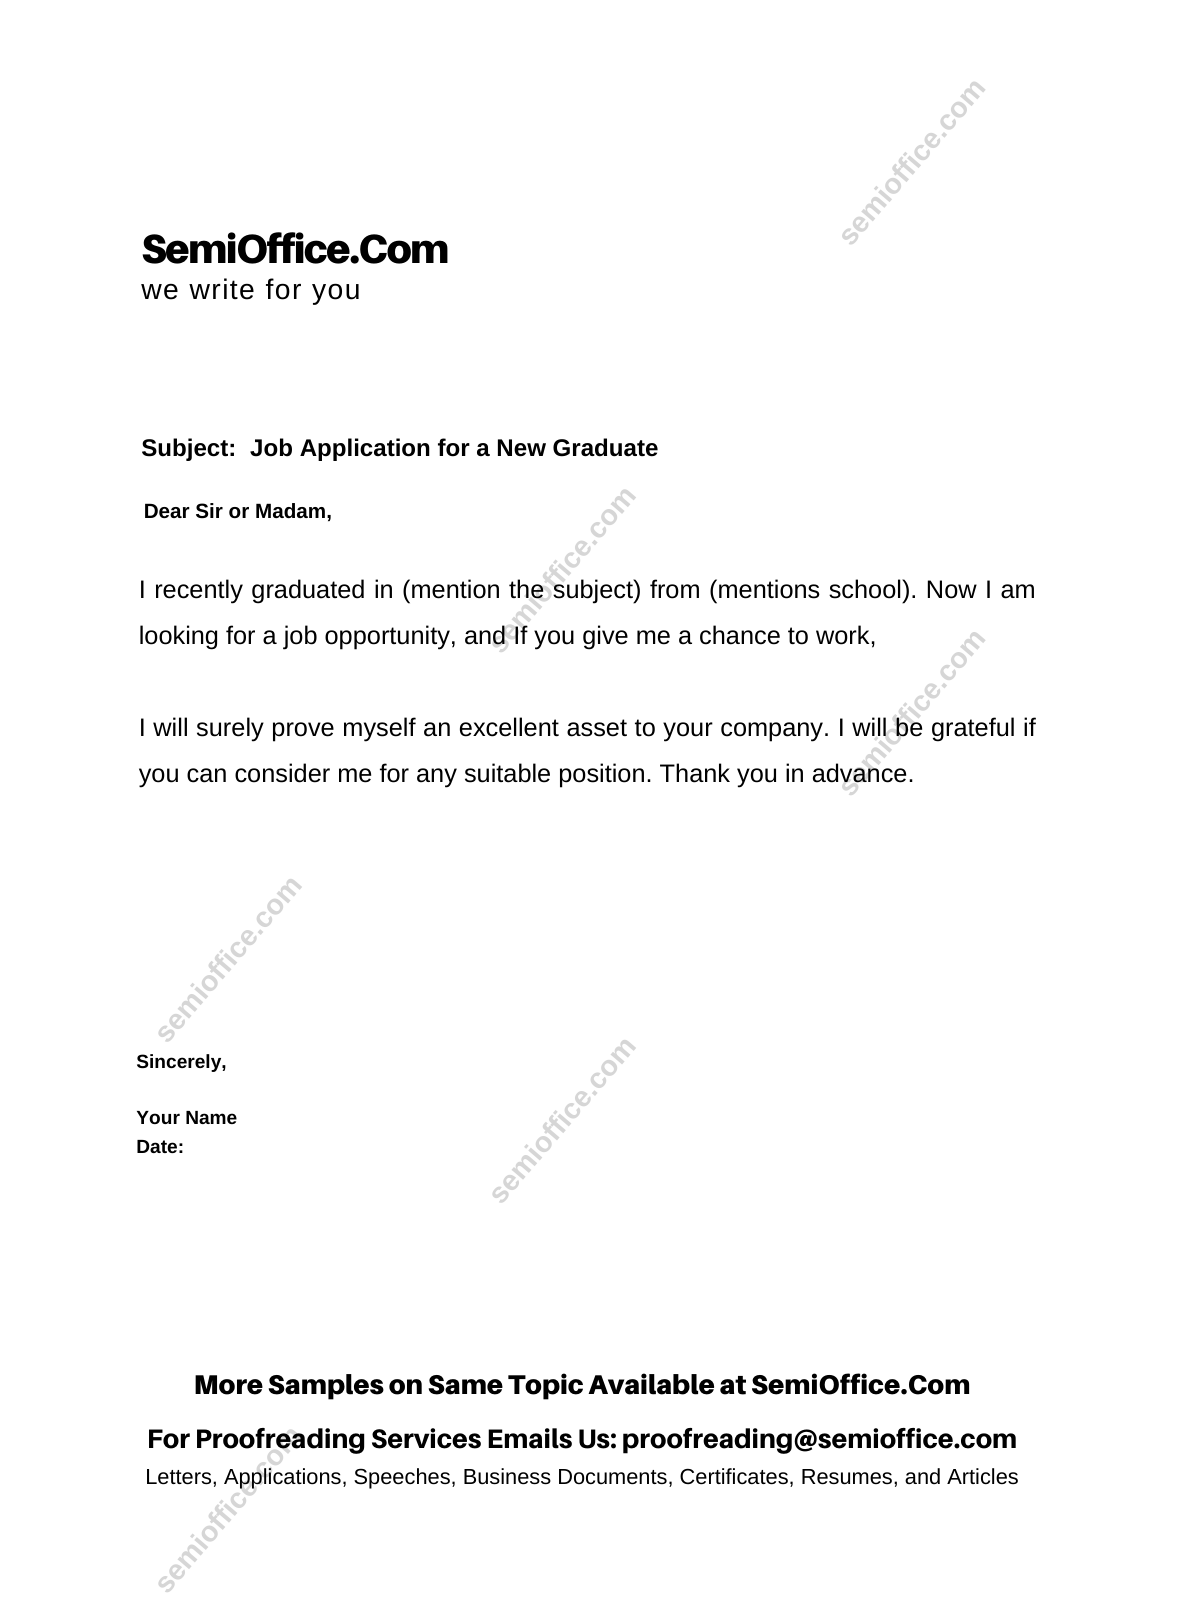 how to write cover letter for job application fresh graduate